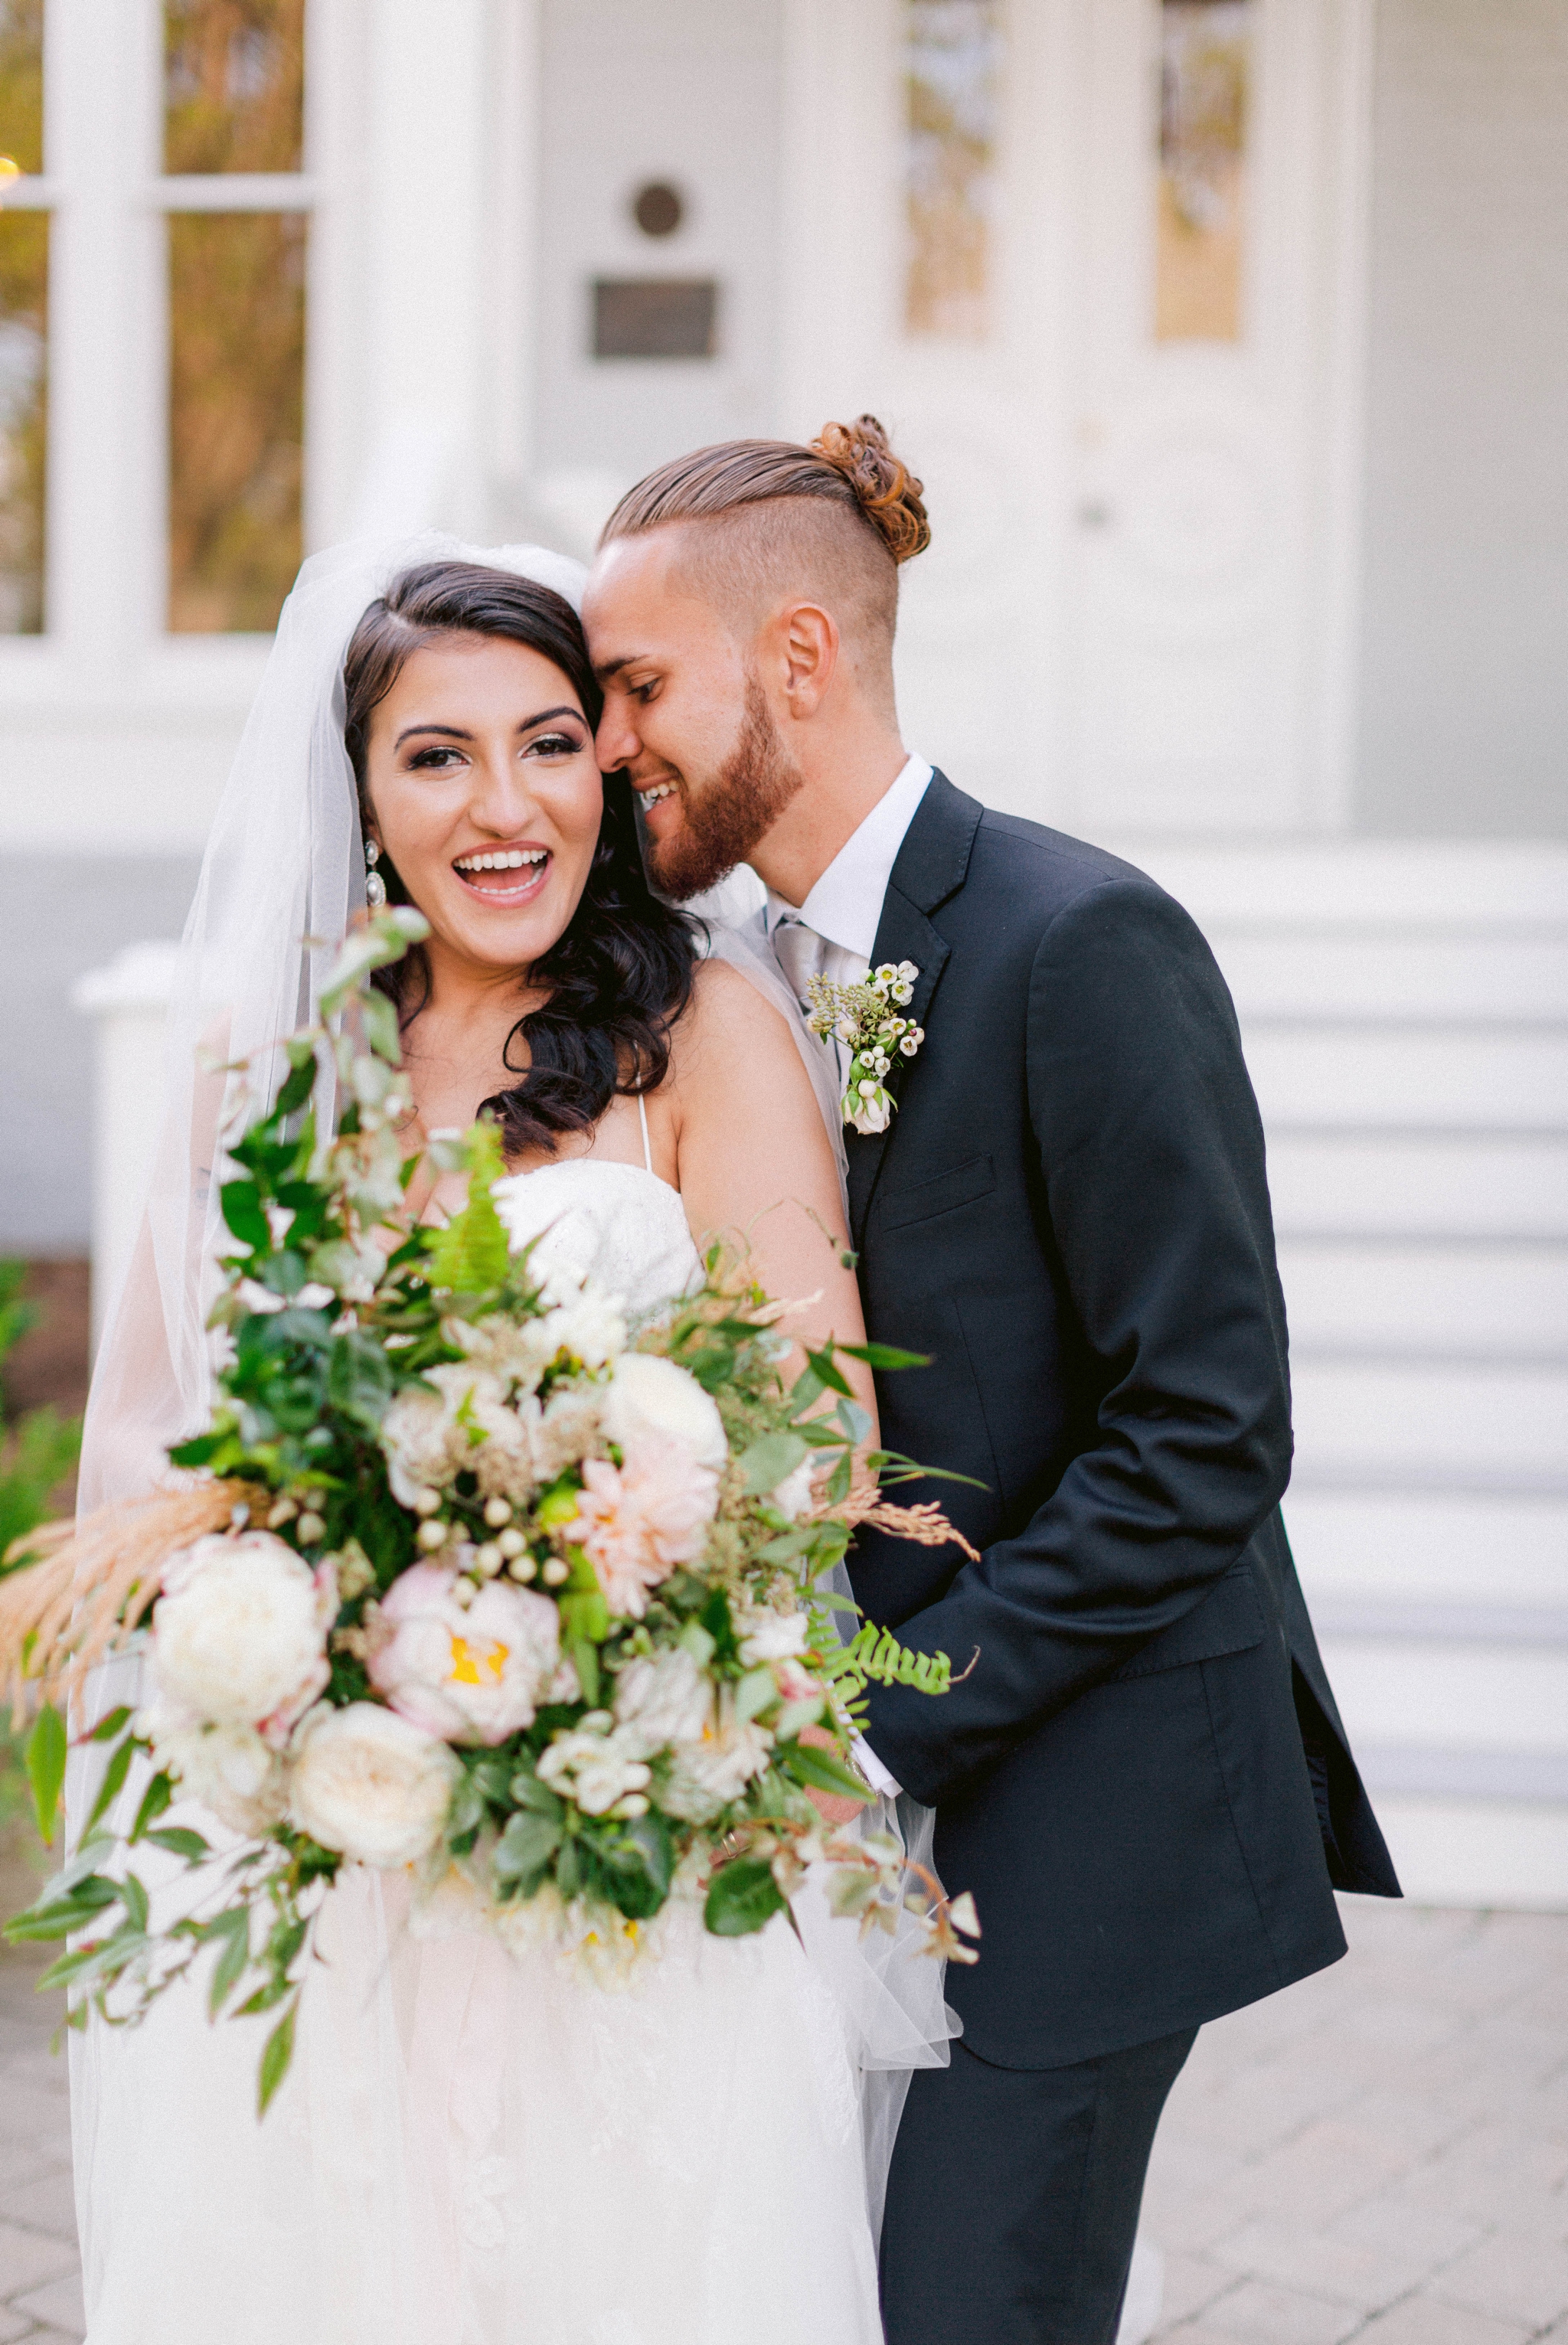  Bride and groom laughing - Wedding Portraits on the front porch of an all white luxury estate - Bride is wearing a Aline Ballgown by Cherish by Southern Bride with a long cathedral veil - Groom is wearing a black suit by Generation Tux and has a man